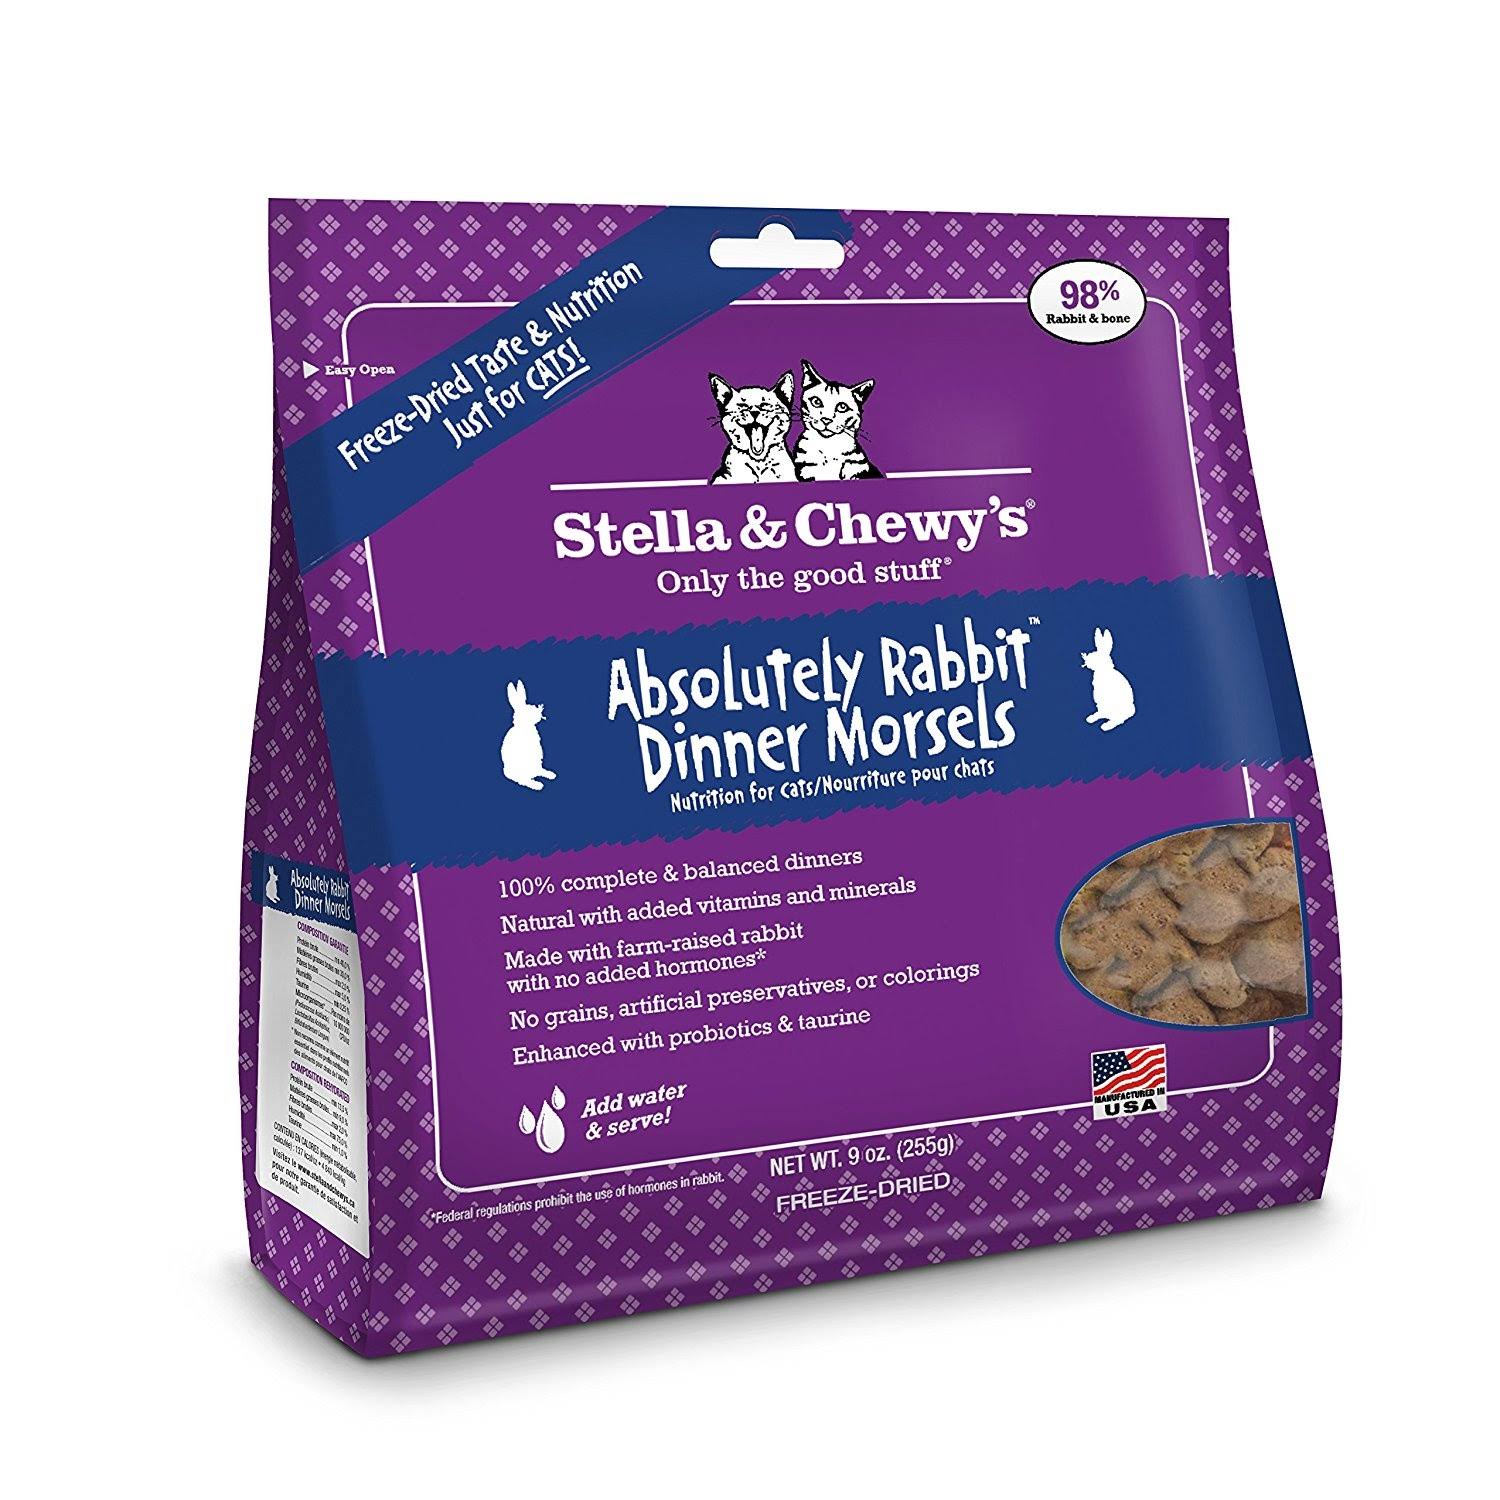 Stella & Chewy's Freeze Dried Food for Cat | Pet_Care_Products | 30 Day Money Back Guarantee | Free Shipping On All Orders | Best Price Guarantee